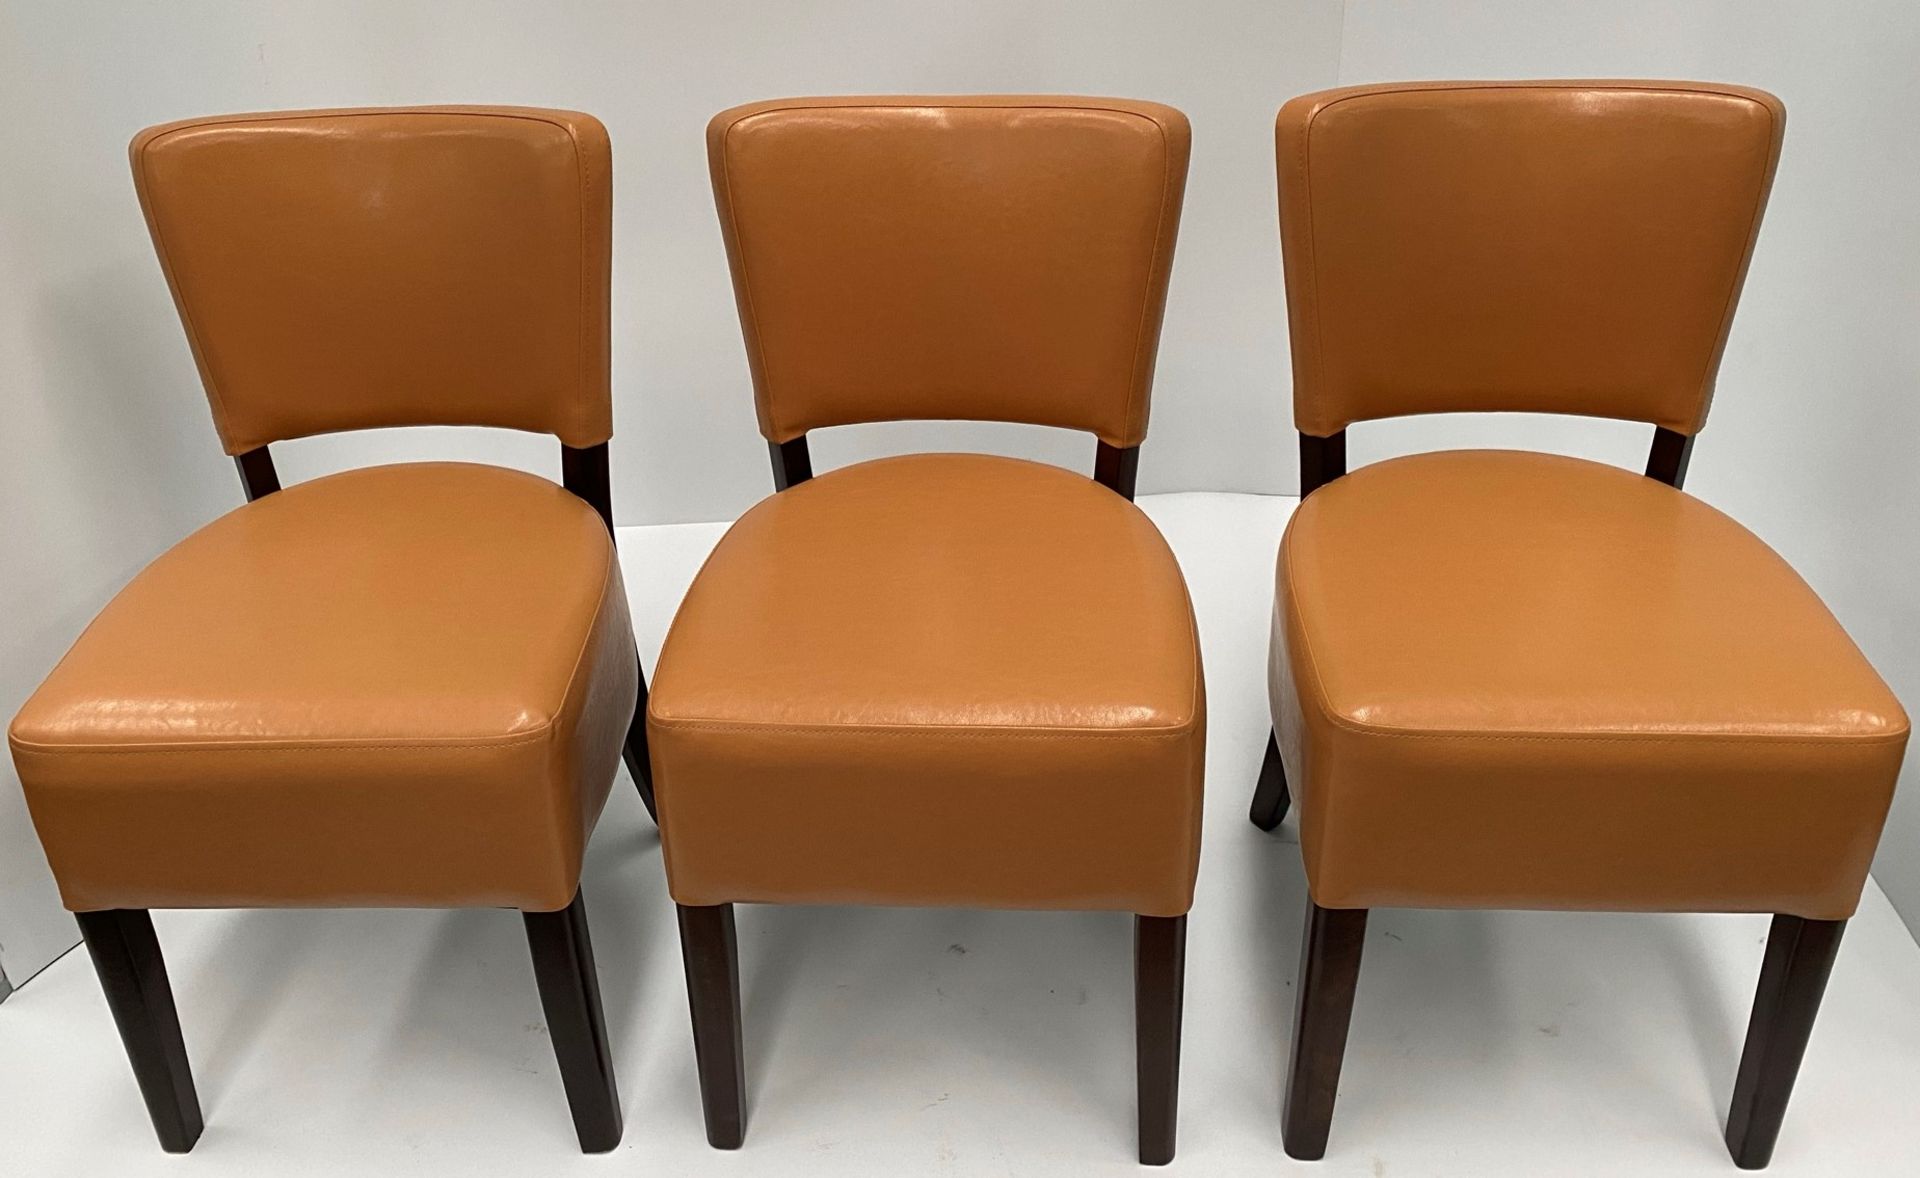 3 x Memphis Margo BR-4 Brown side/dining chairs with walnut coloured frames